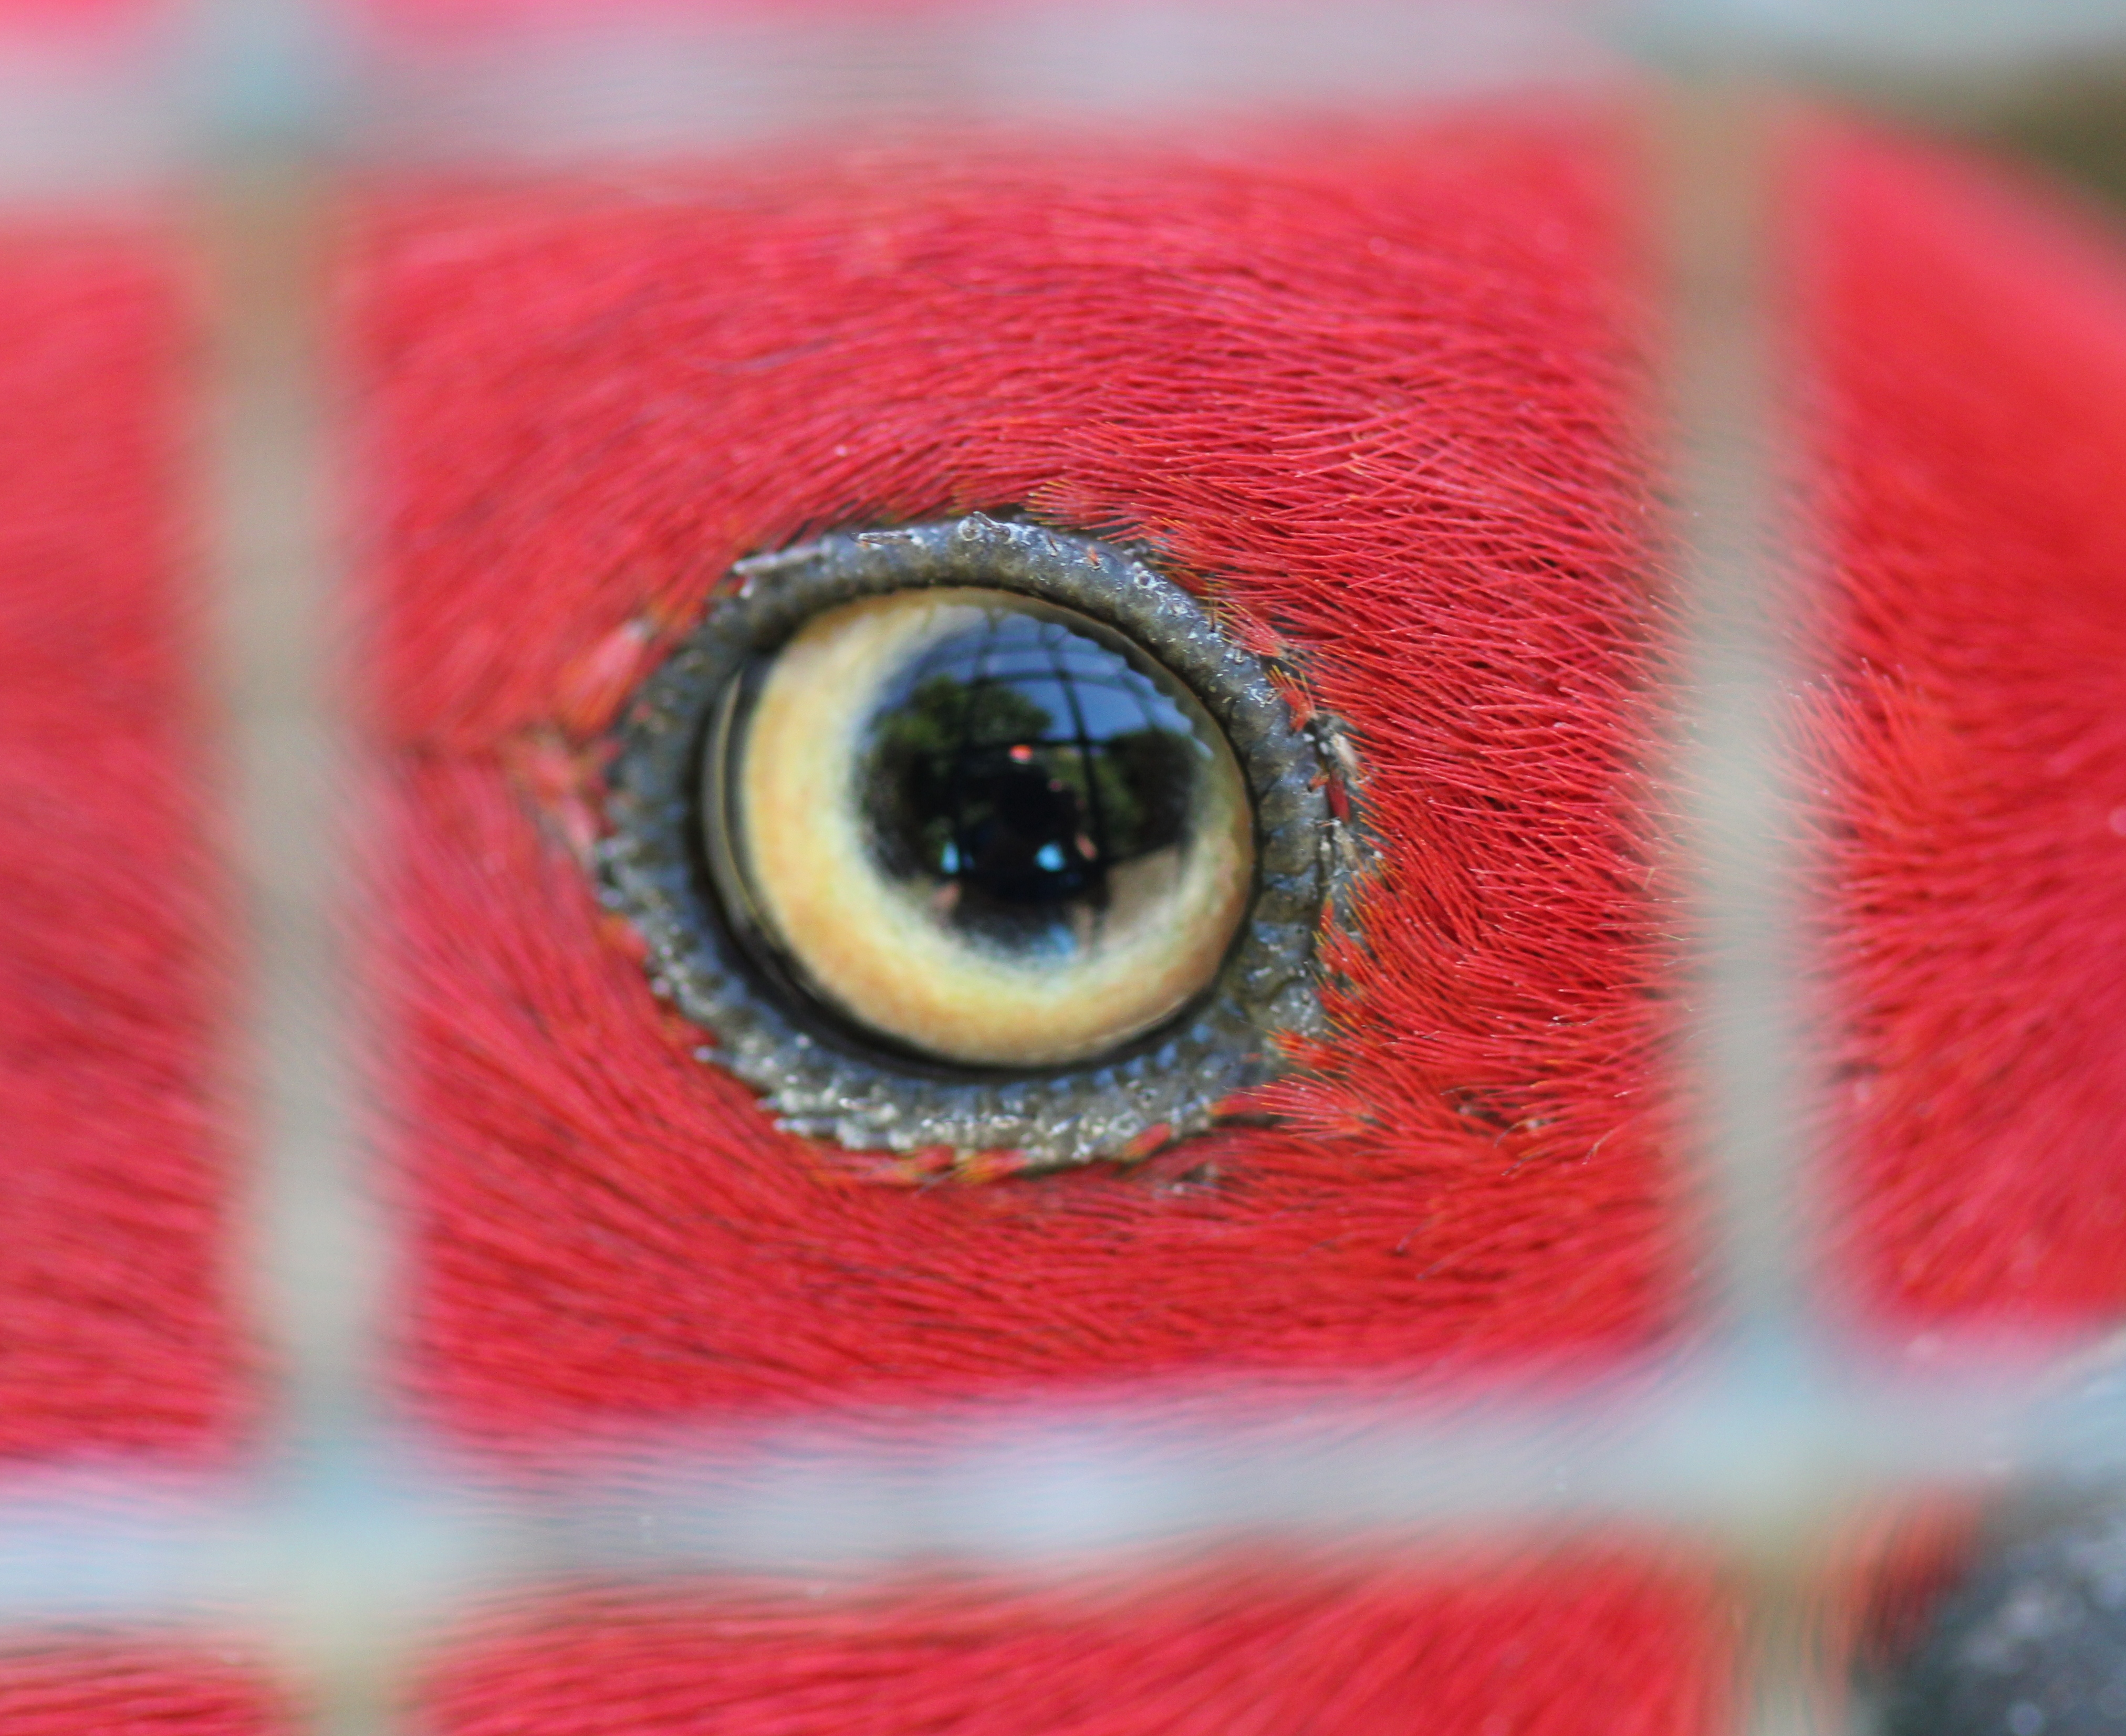 eye_of_female_eclectus_parrot_seen_through_wire_mesh_LBM